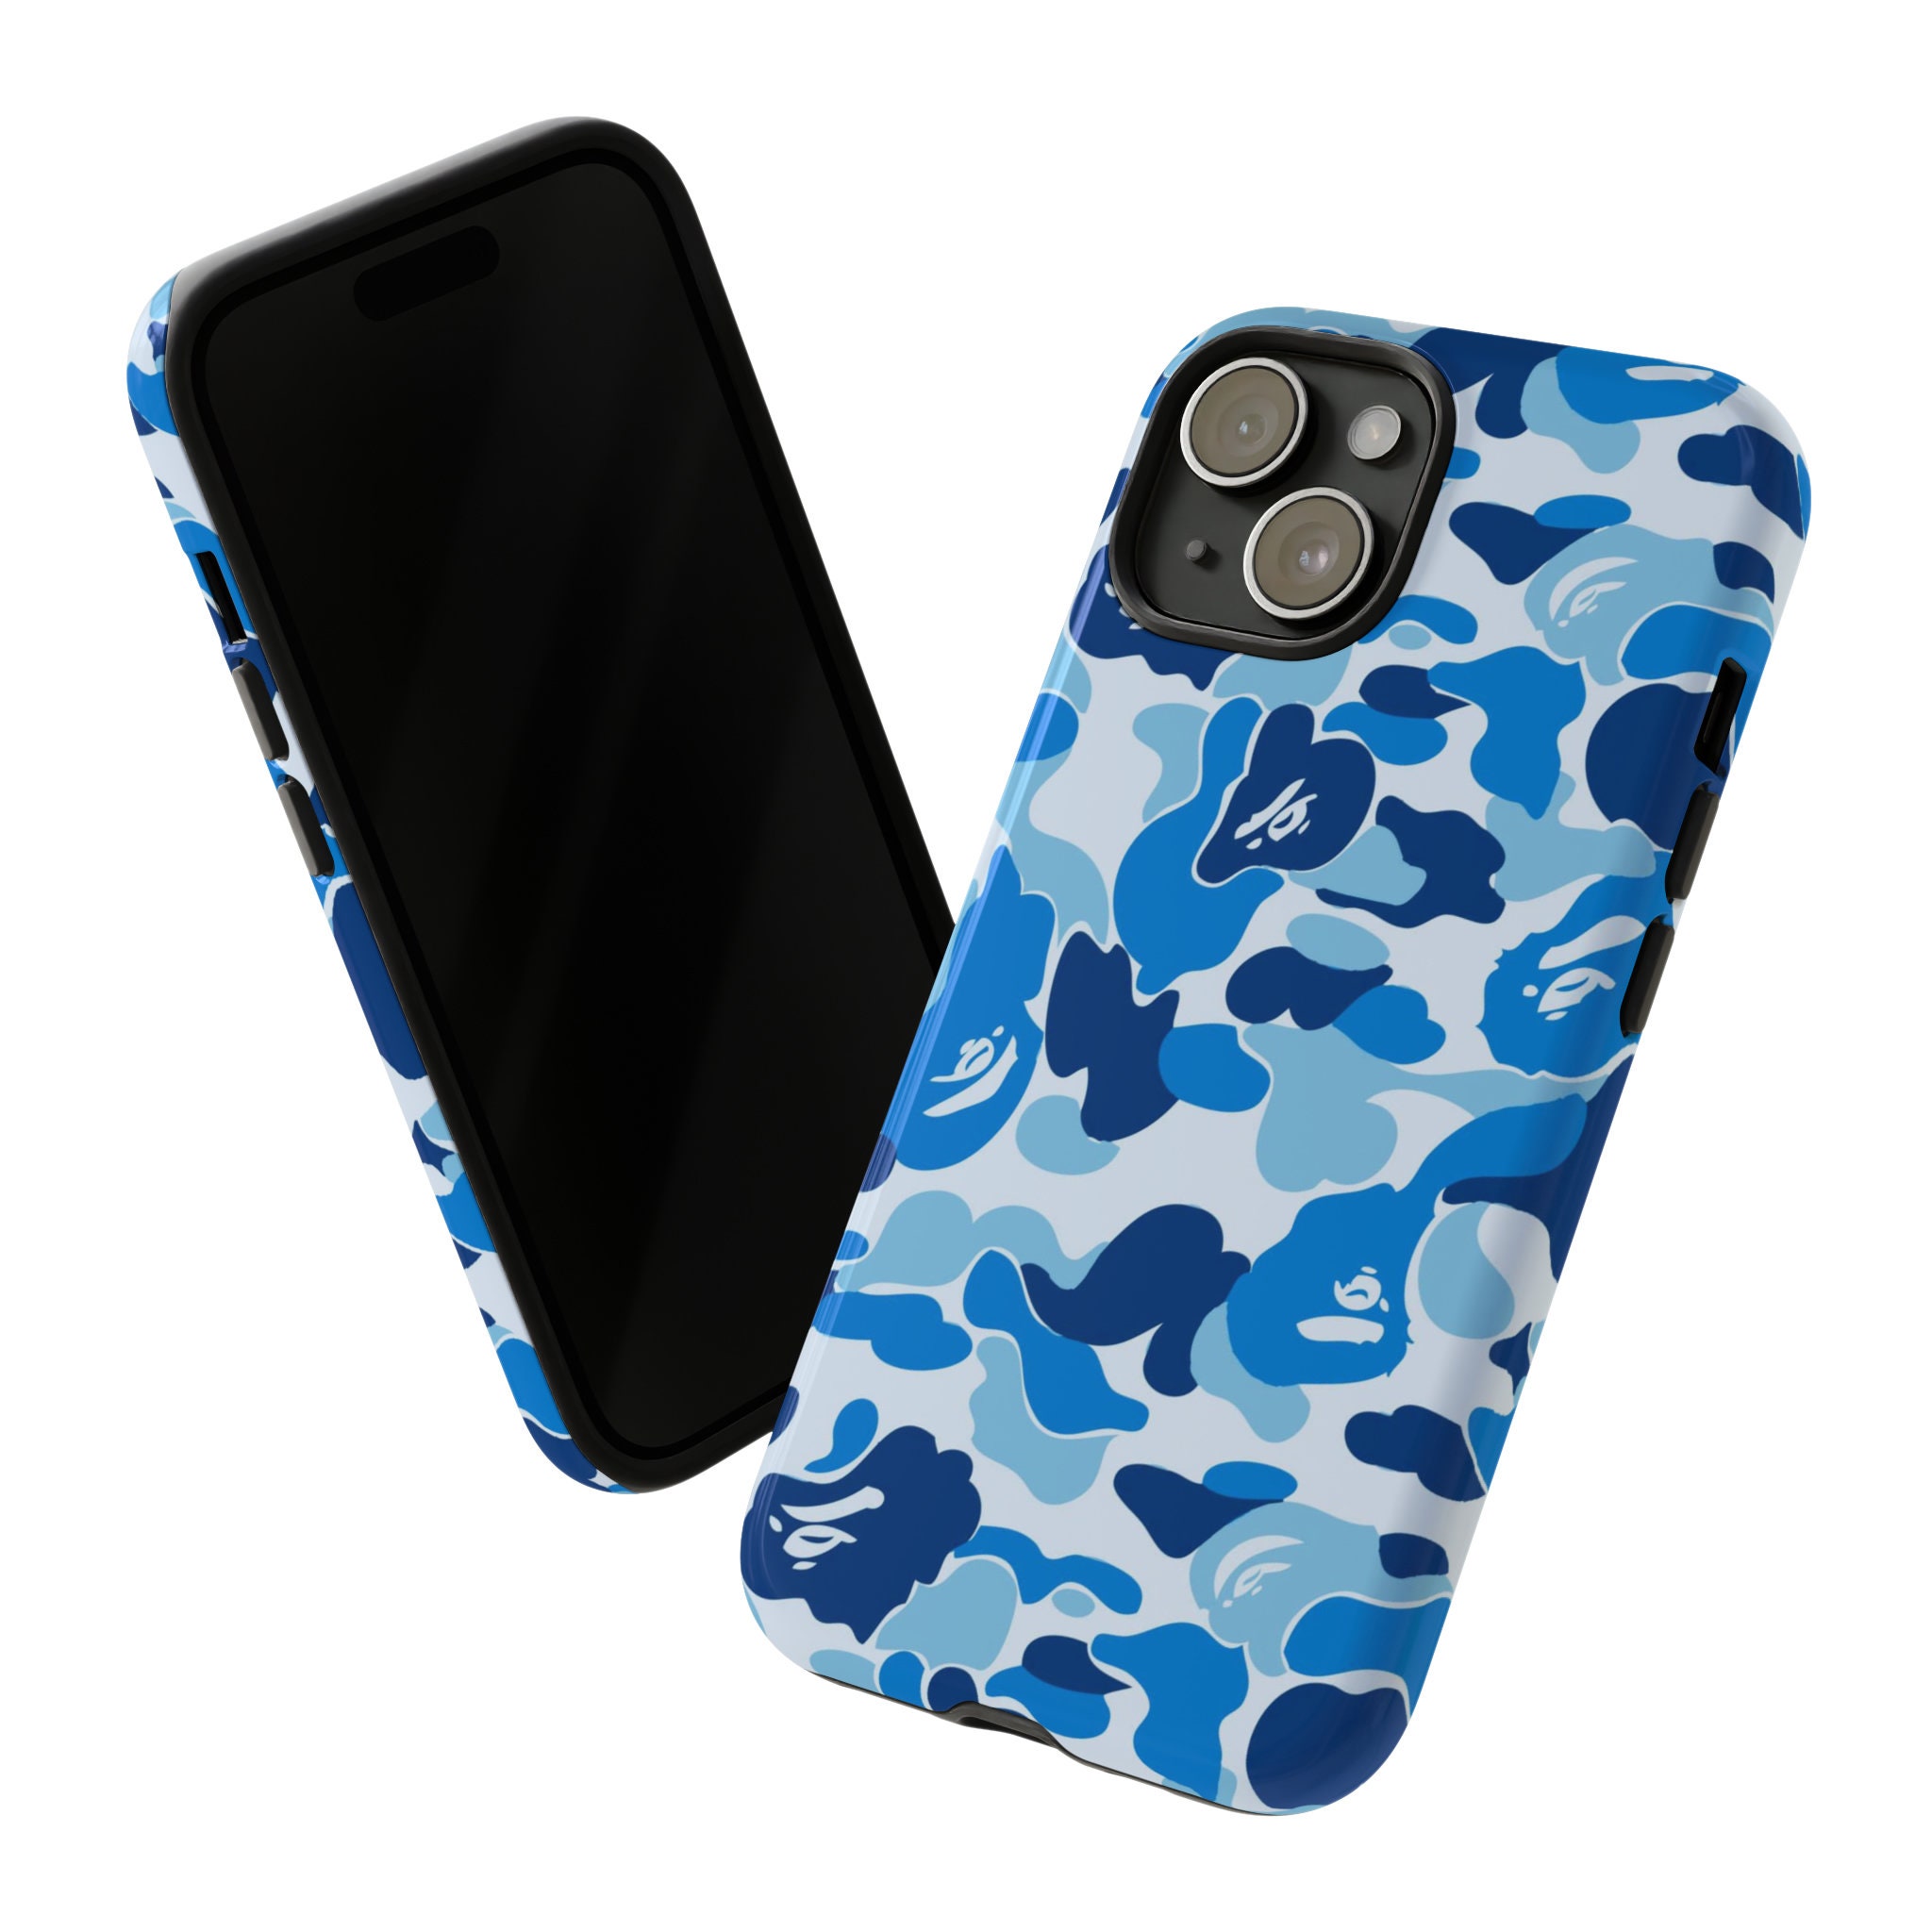 A Bathing Ape iPhone 11 Pro Cases - BAGAHOLICBOY